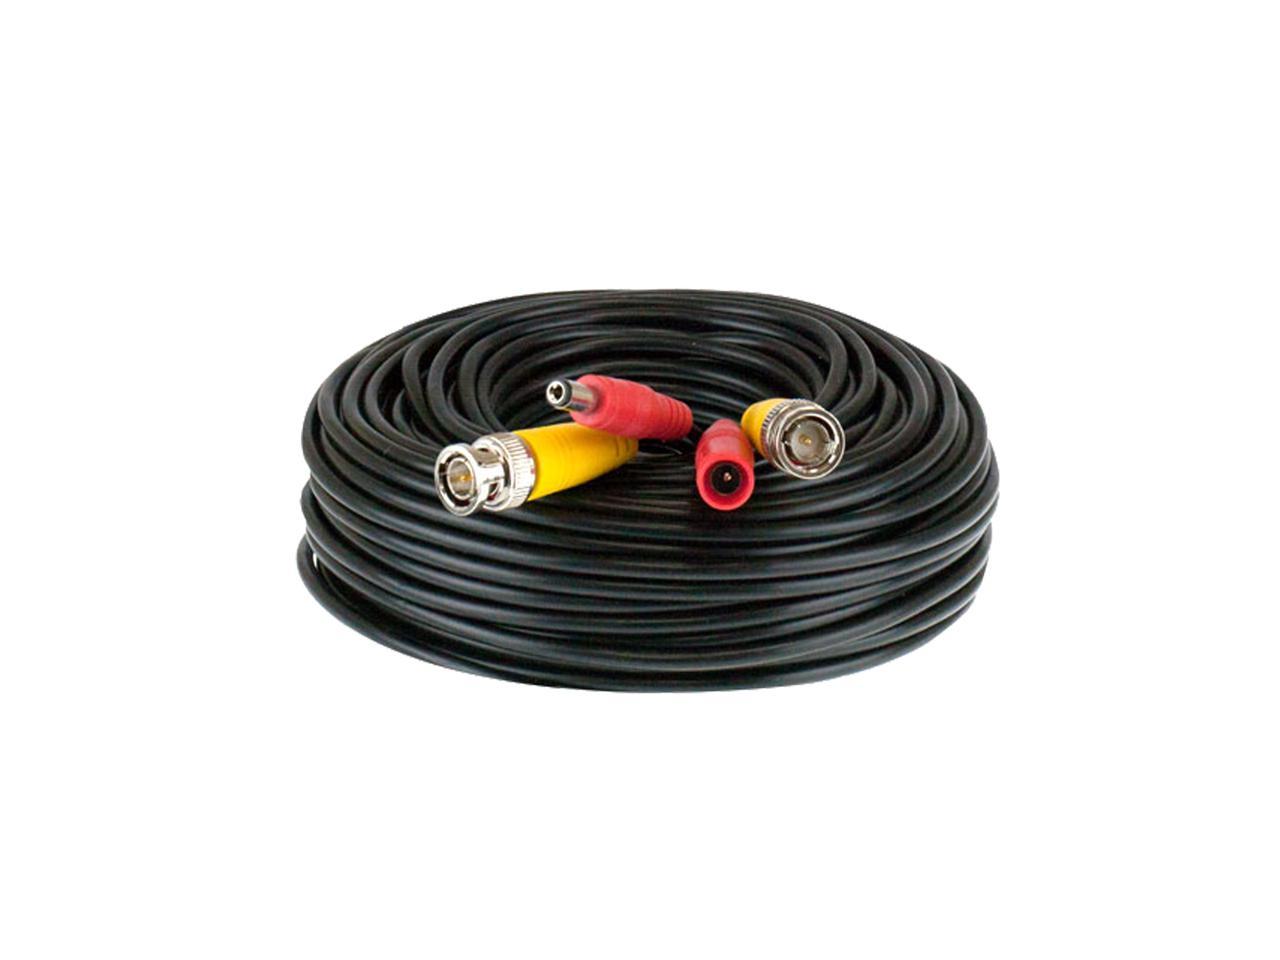 100' CCTV Camera Siamese Coax Cable with Power Wire 